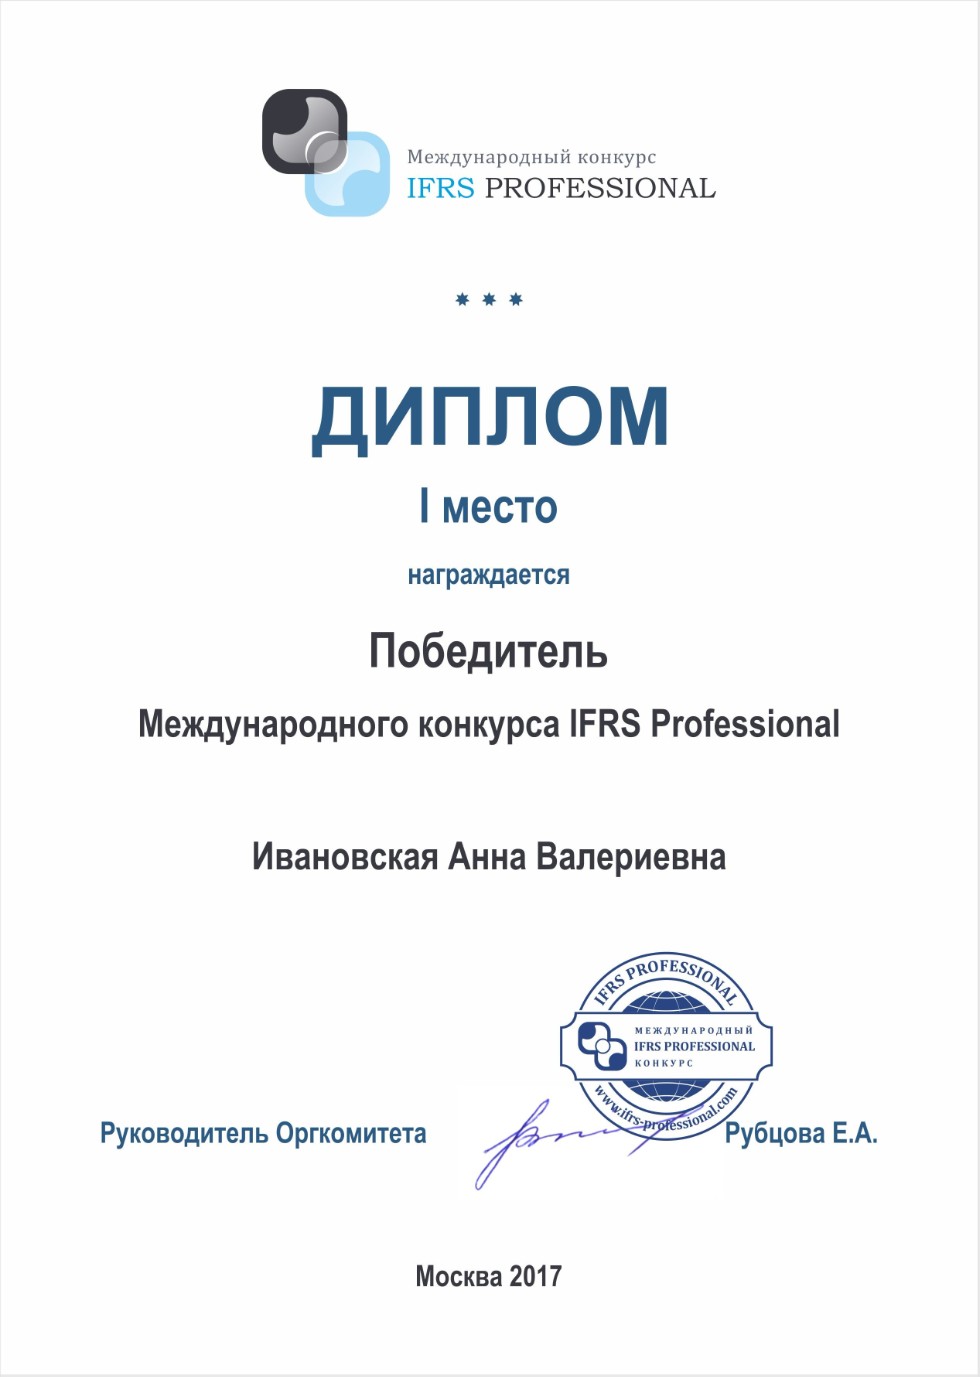        ?    IFRS PROFESSIONAL 2017! ,IFRS Professional,  .., 